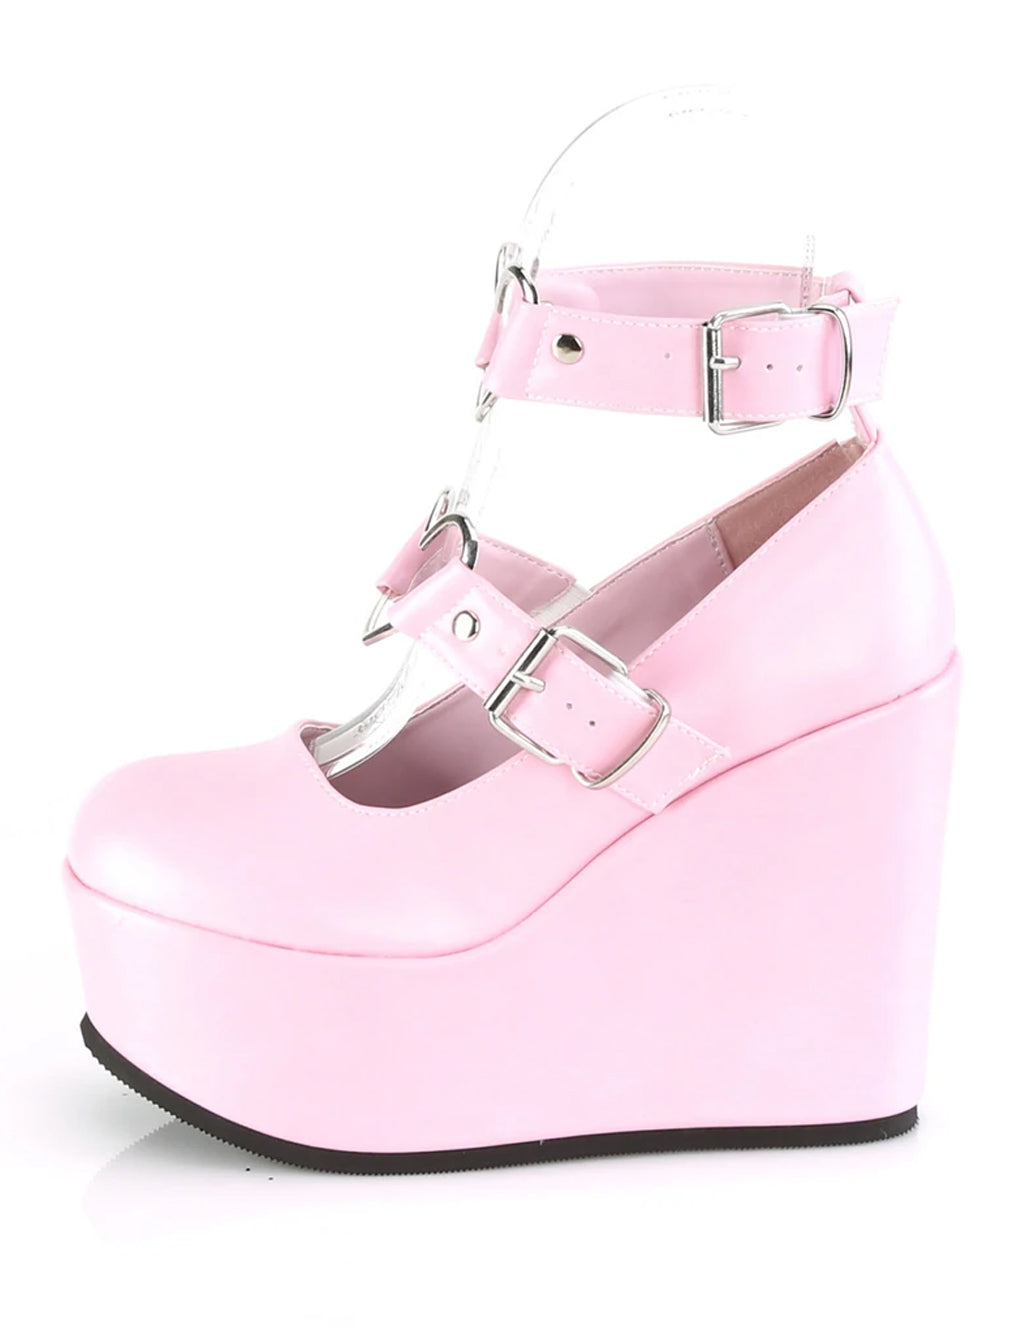 POISON-99-2 - BABY PINK VEGAN LEATHER - SIZE 10